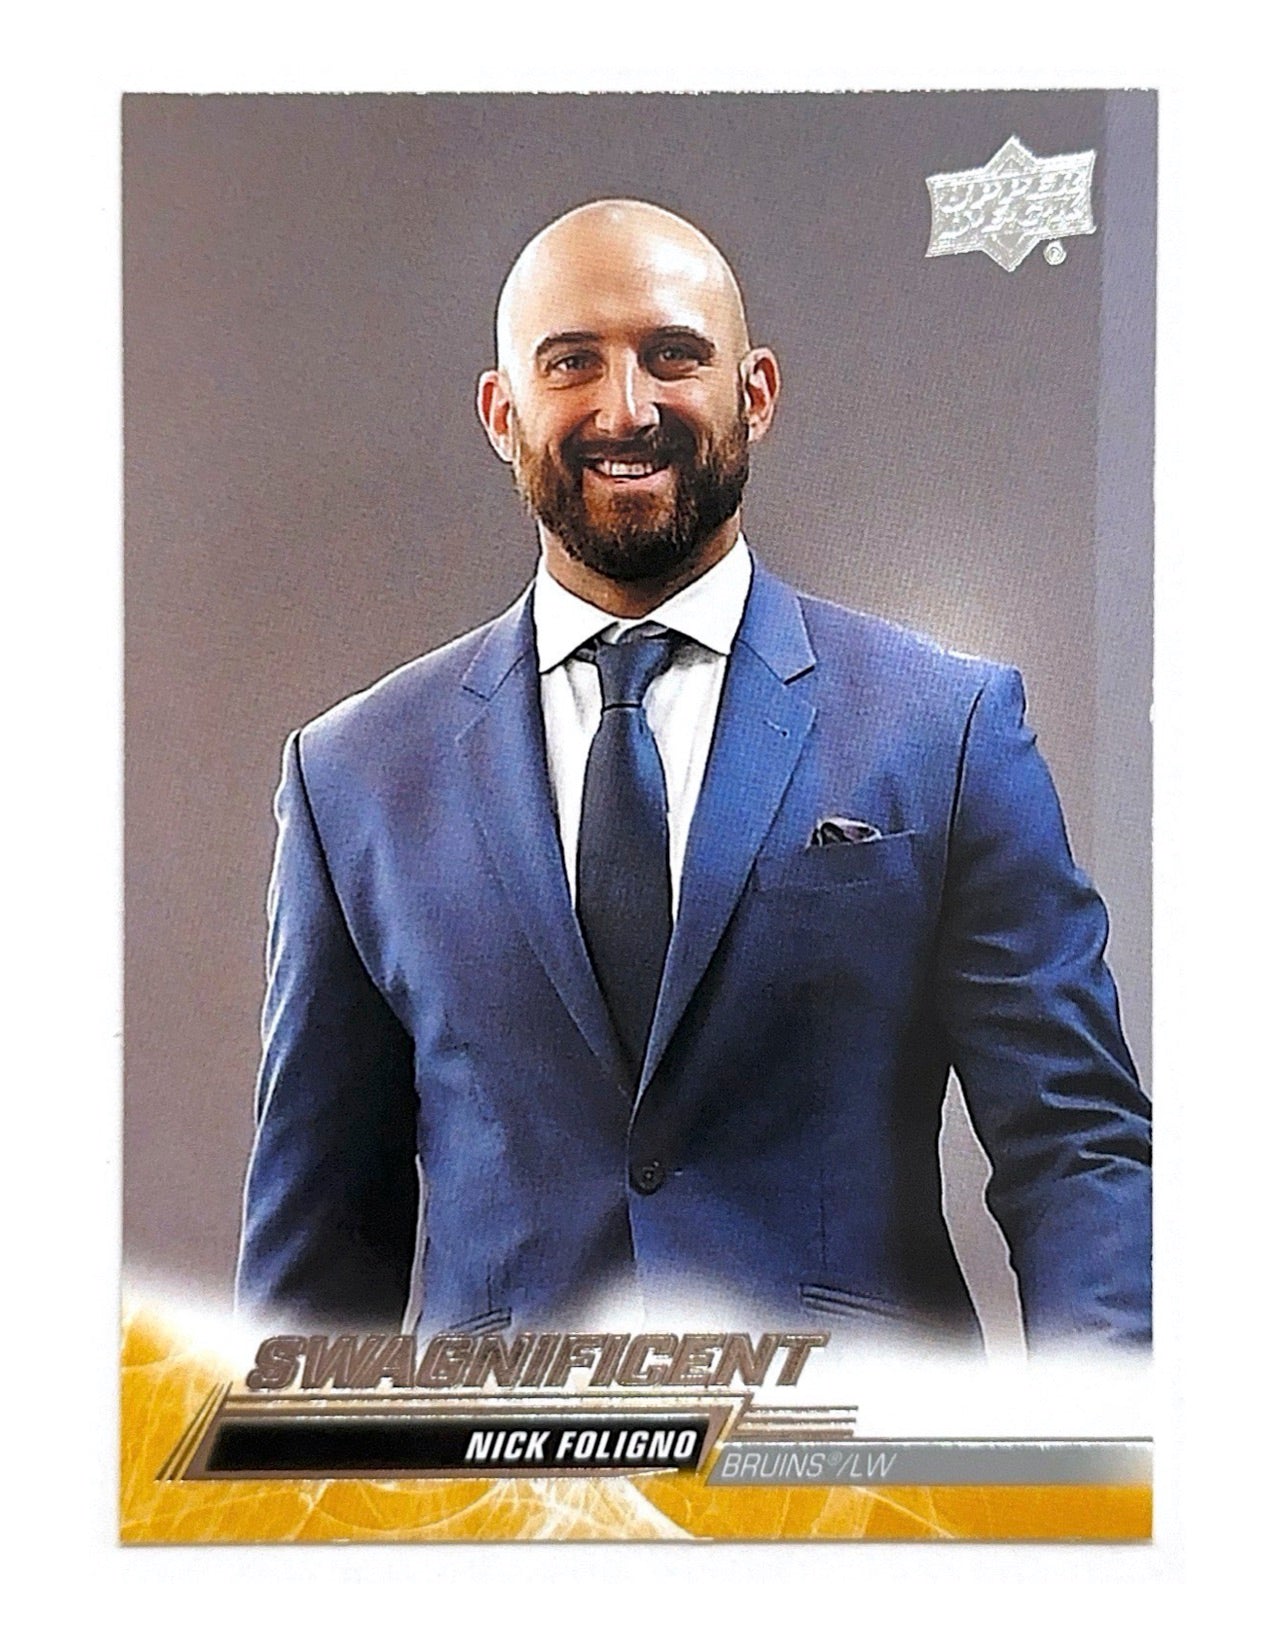 Nick Foligno 2022-23 Upper Deck Extended Series Swagnificent #515